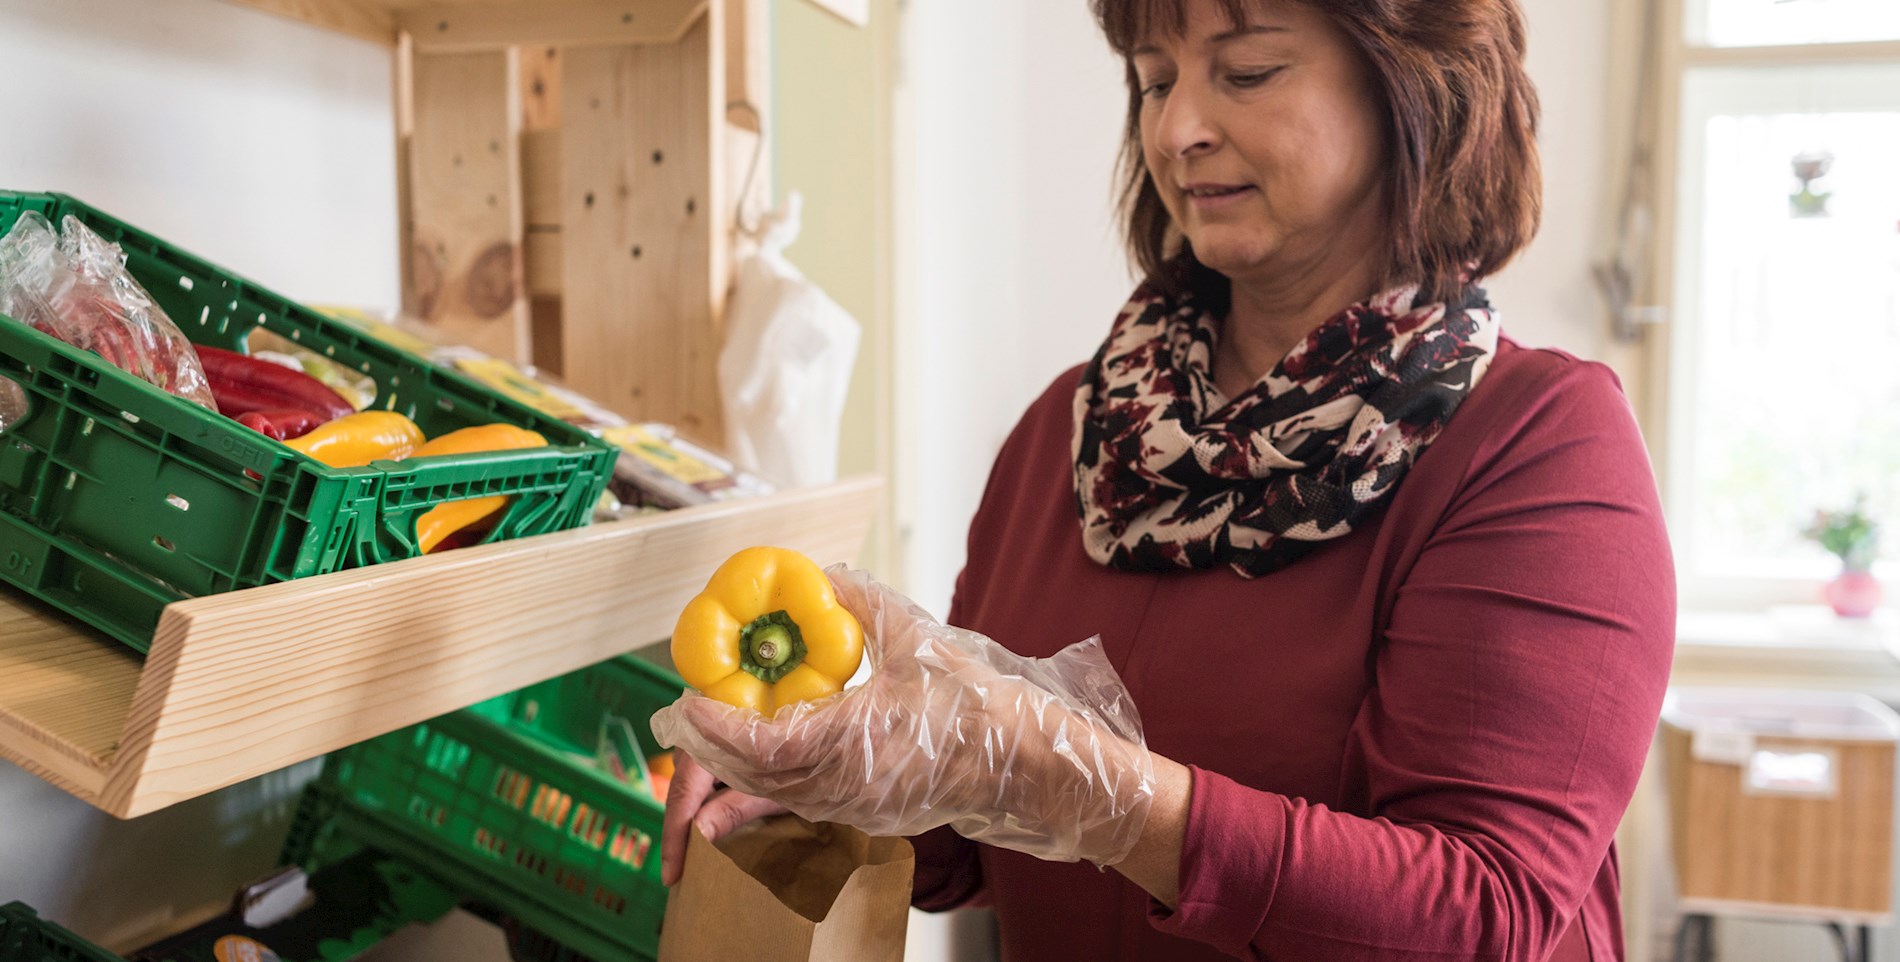 You can see an employee in the social supermarket in Fürstenfeld. She is wearing a plastic glove and putting a yellow pepper into a paper bag.